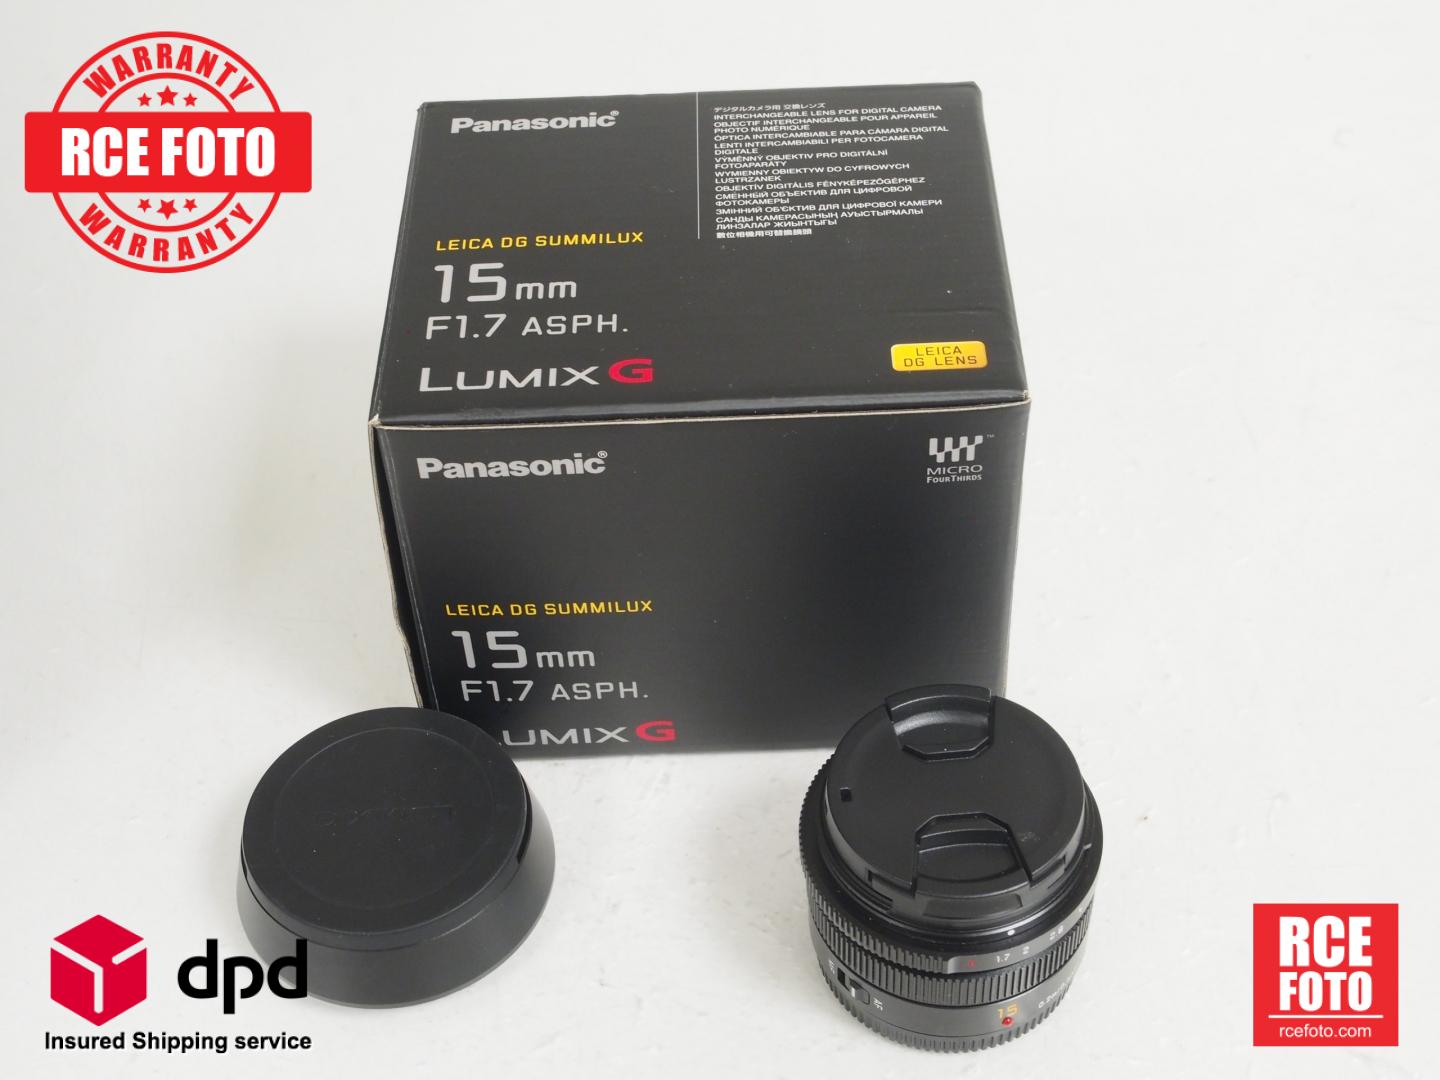 Used Panasonic Leica DG Summilux 15mm f/1.7 ASPH - RCE Foto - the largest  market of guaranteed used photograpy equipment